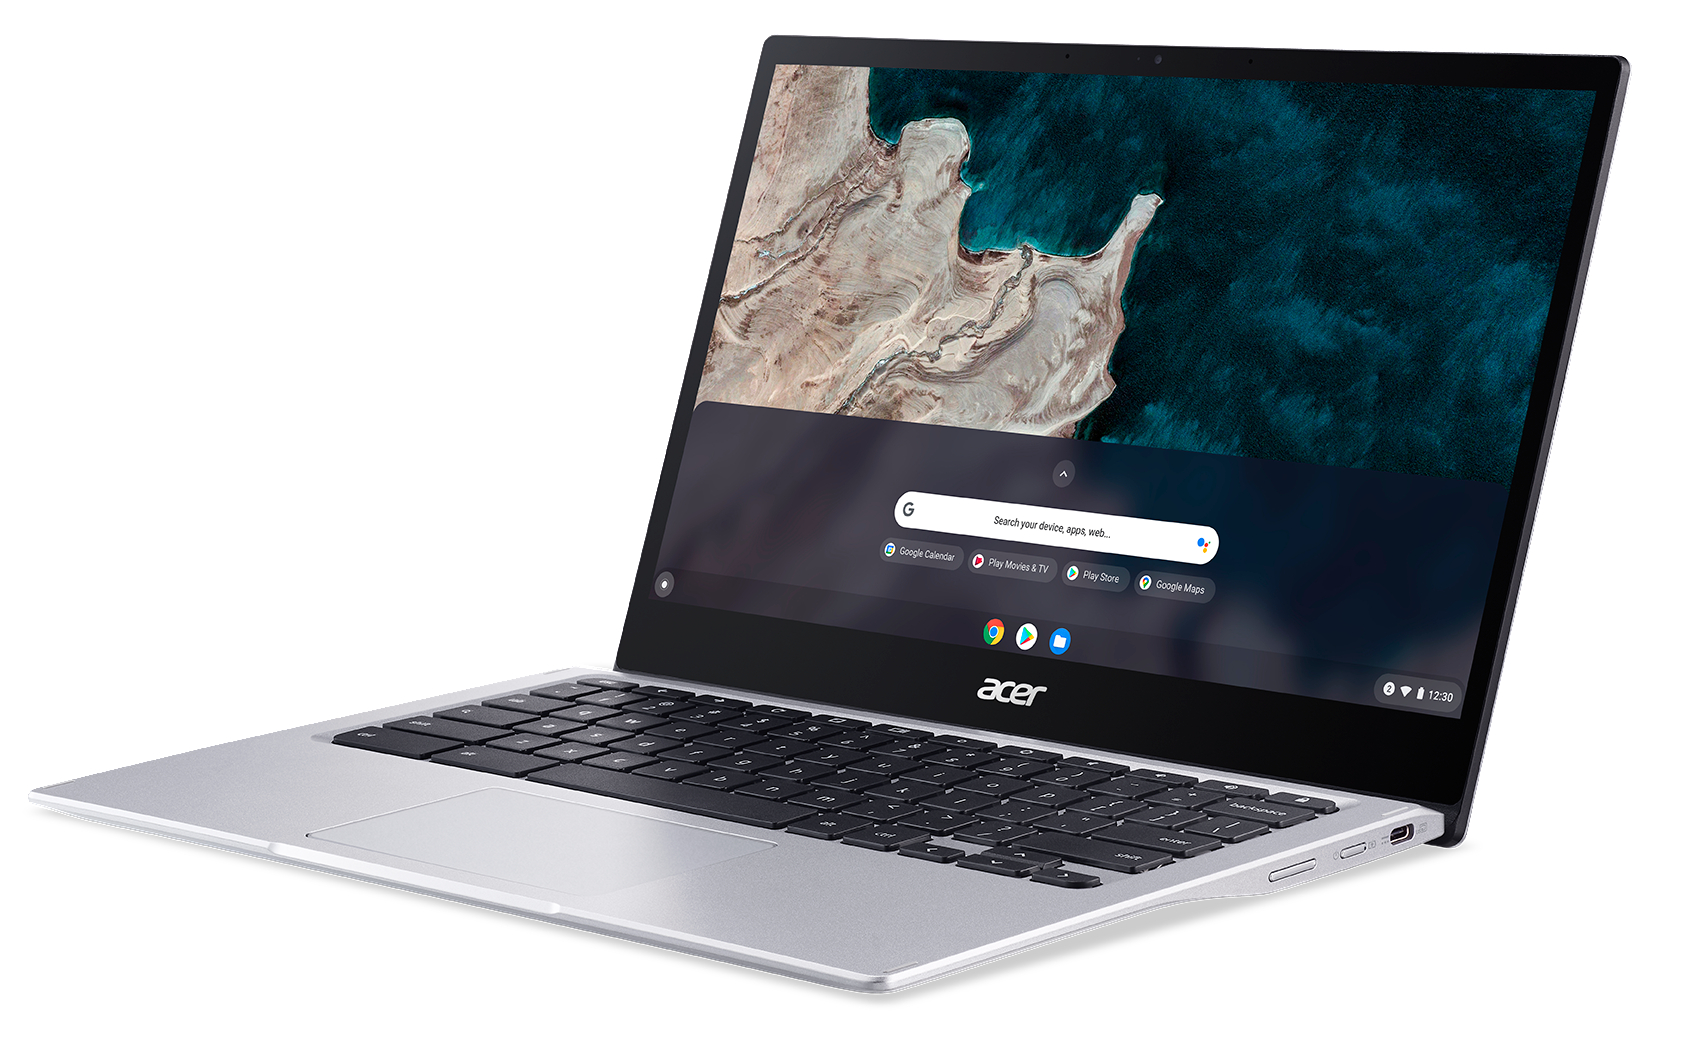 GB Tastaturbeleuchtung, Touchscreen, Chromebook, OS Display 7c Spin eMMC, Silber 4 Google RAM, 513 Onboard Zoll Chromebook 64 GB 13,3 Qualcomm mit Adreno™ (CP513-1H-S72Y) Graphics, Chrome ACER mit Prozessor,